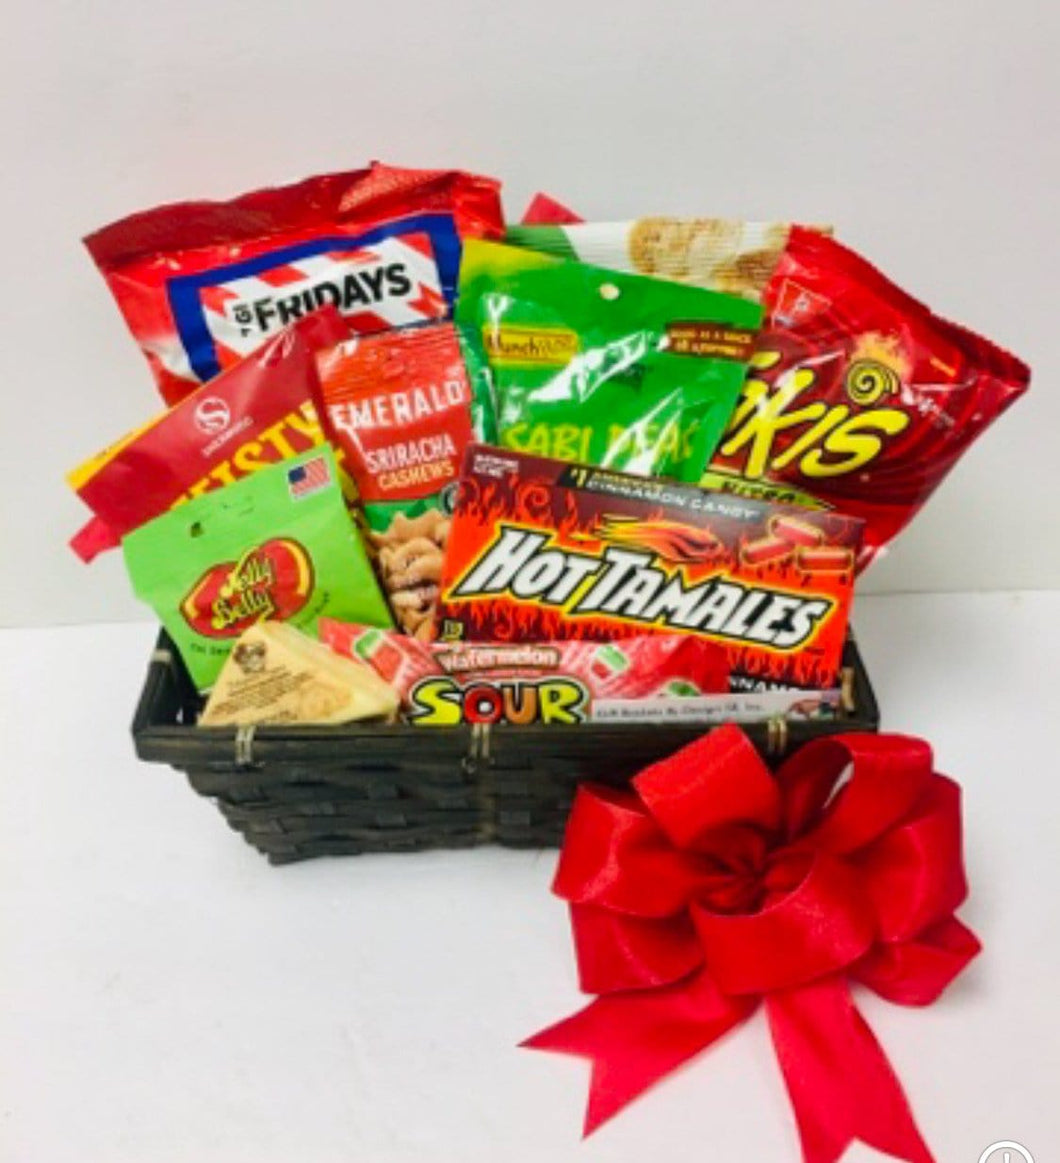 Keeping it Spicy 🌶 - Gift Baskets By Design SB, Inc.